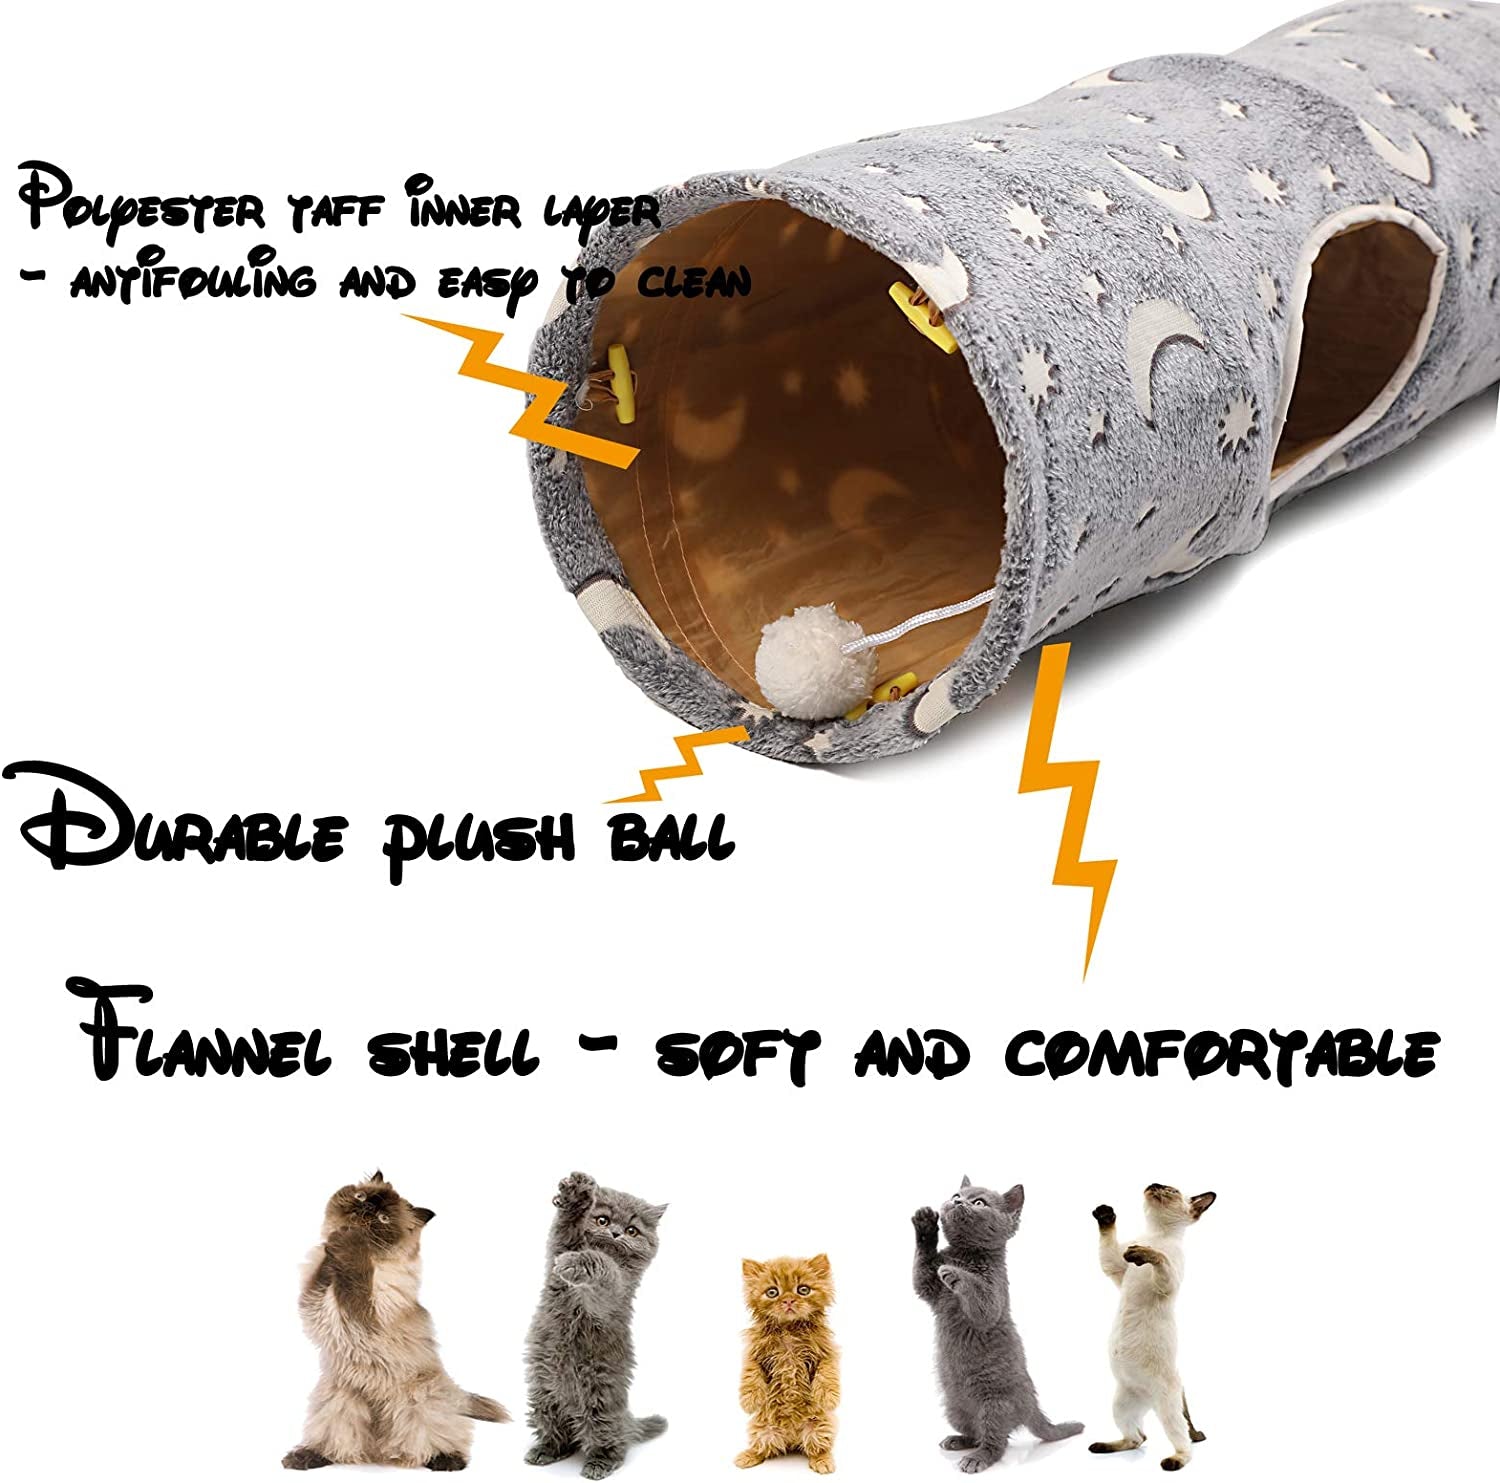 Cat Tunnel Tube with Plush Ball Toys Collapsible Self-Luminous Photoluminescence, for Small Animals Pets Bunny Rabbits, Kittens, Ferrets,Puppy and Dogs Grey Moon Star